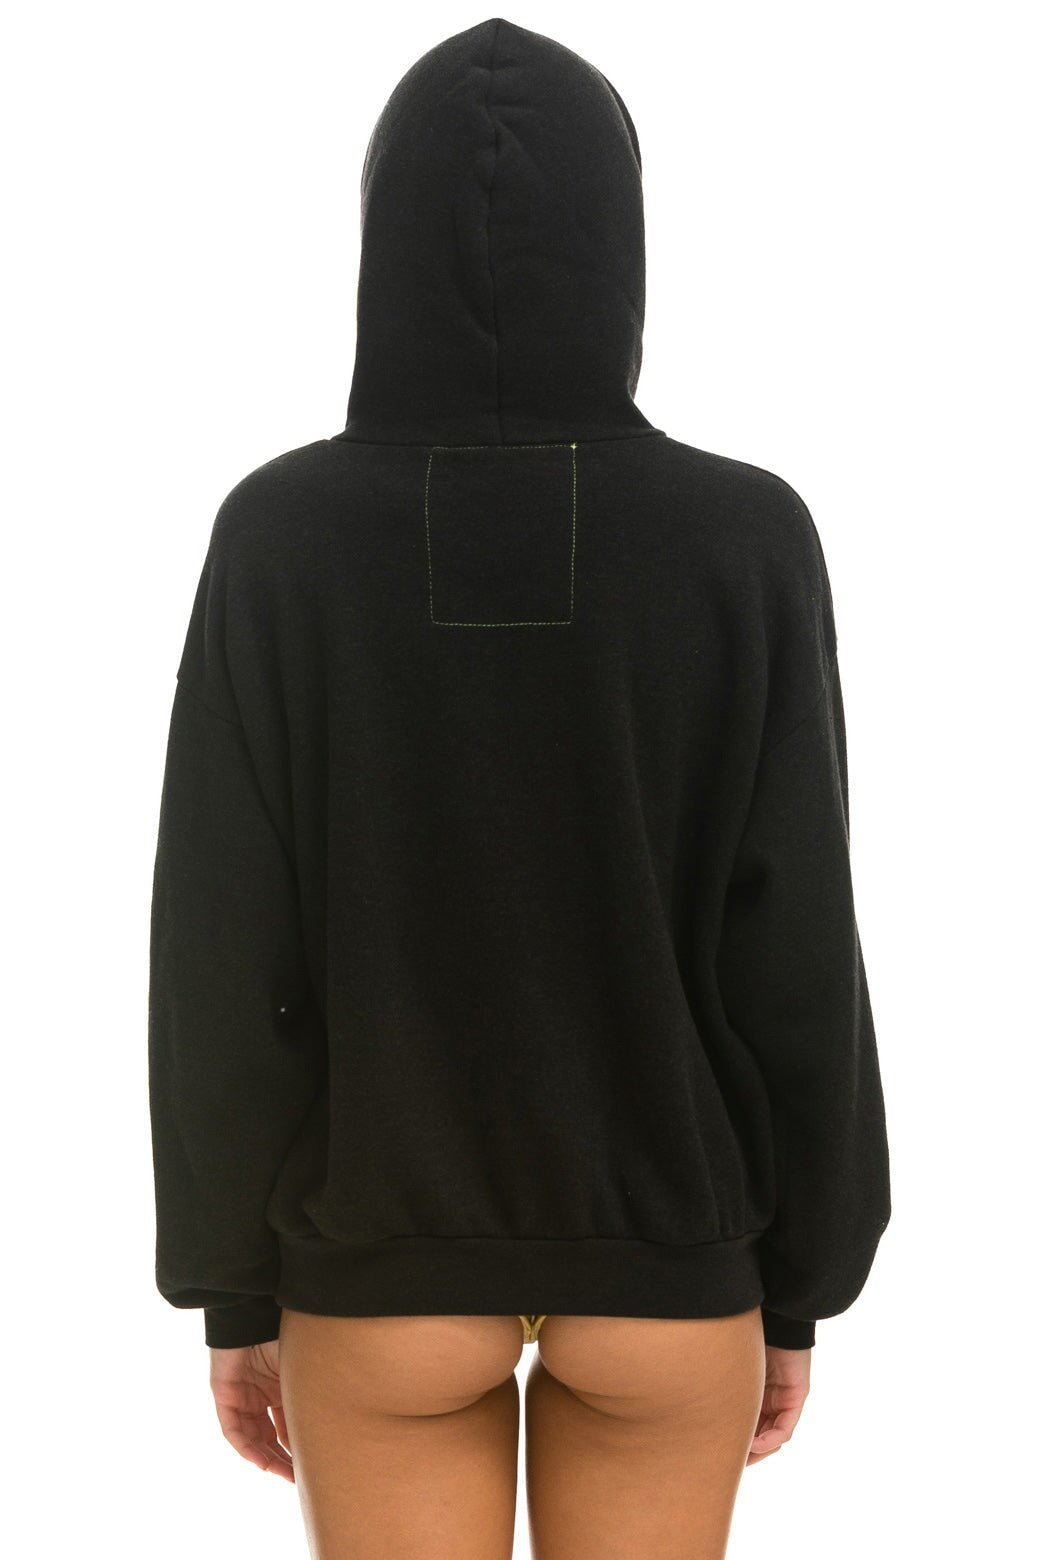 BOLT GRADIENT RELAXED PULLOVER HOODIE - BLACK // BLUE Hoodie Aviator Nation 